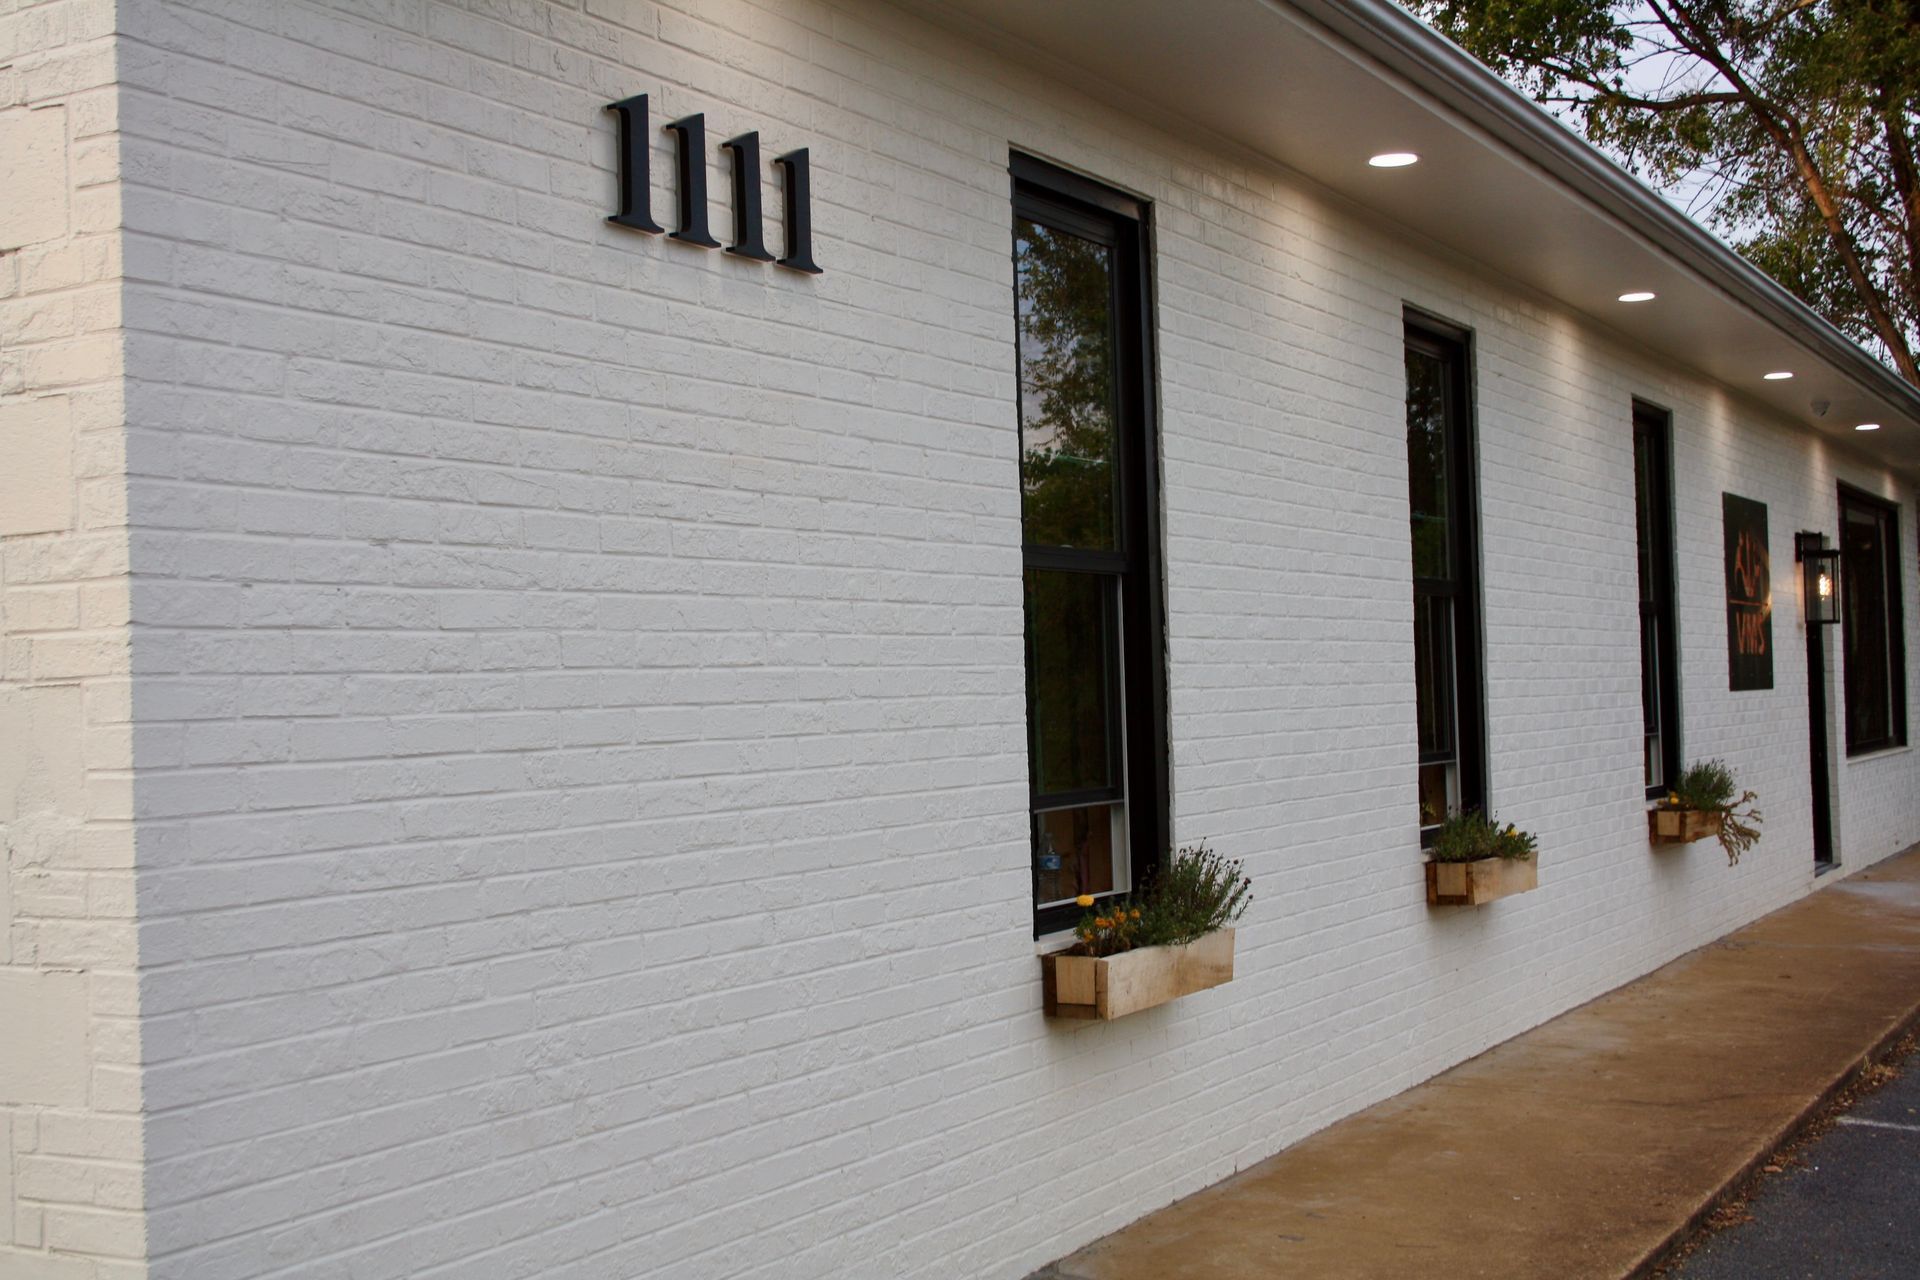 A white brick building with the number 1111 on it